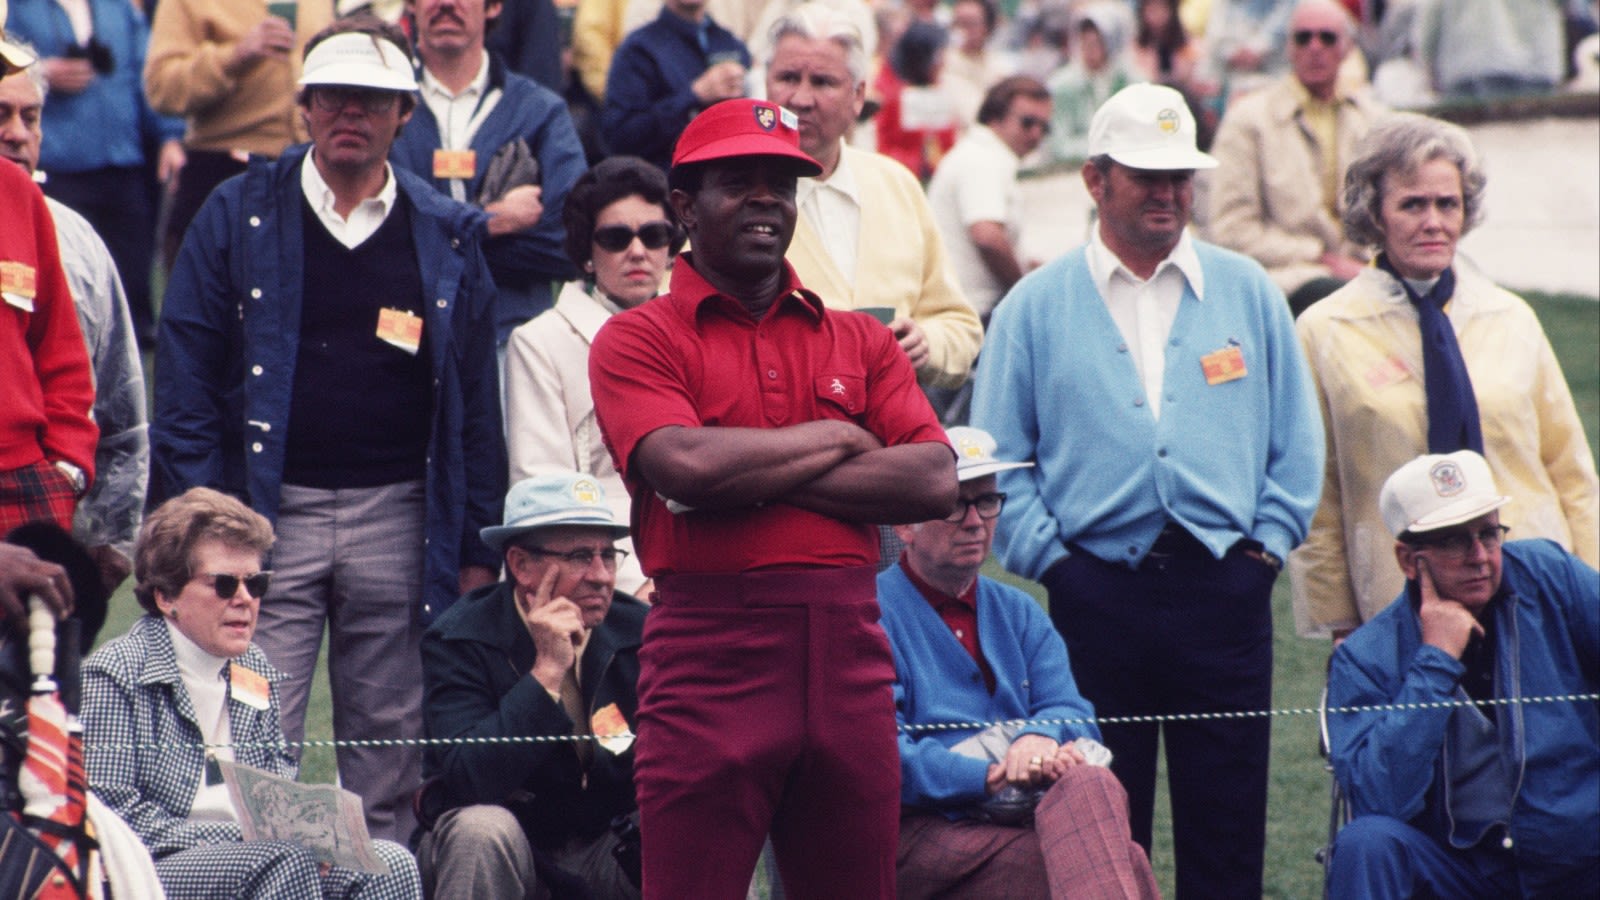 Lee Elder watches his shot in front of a small gallery during the 1975 Masters Tournament at Augusta National Golf Club in Augusta, Georgia. (Photo by Augusta National/Getty Images)